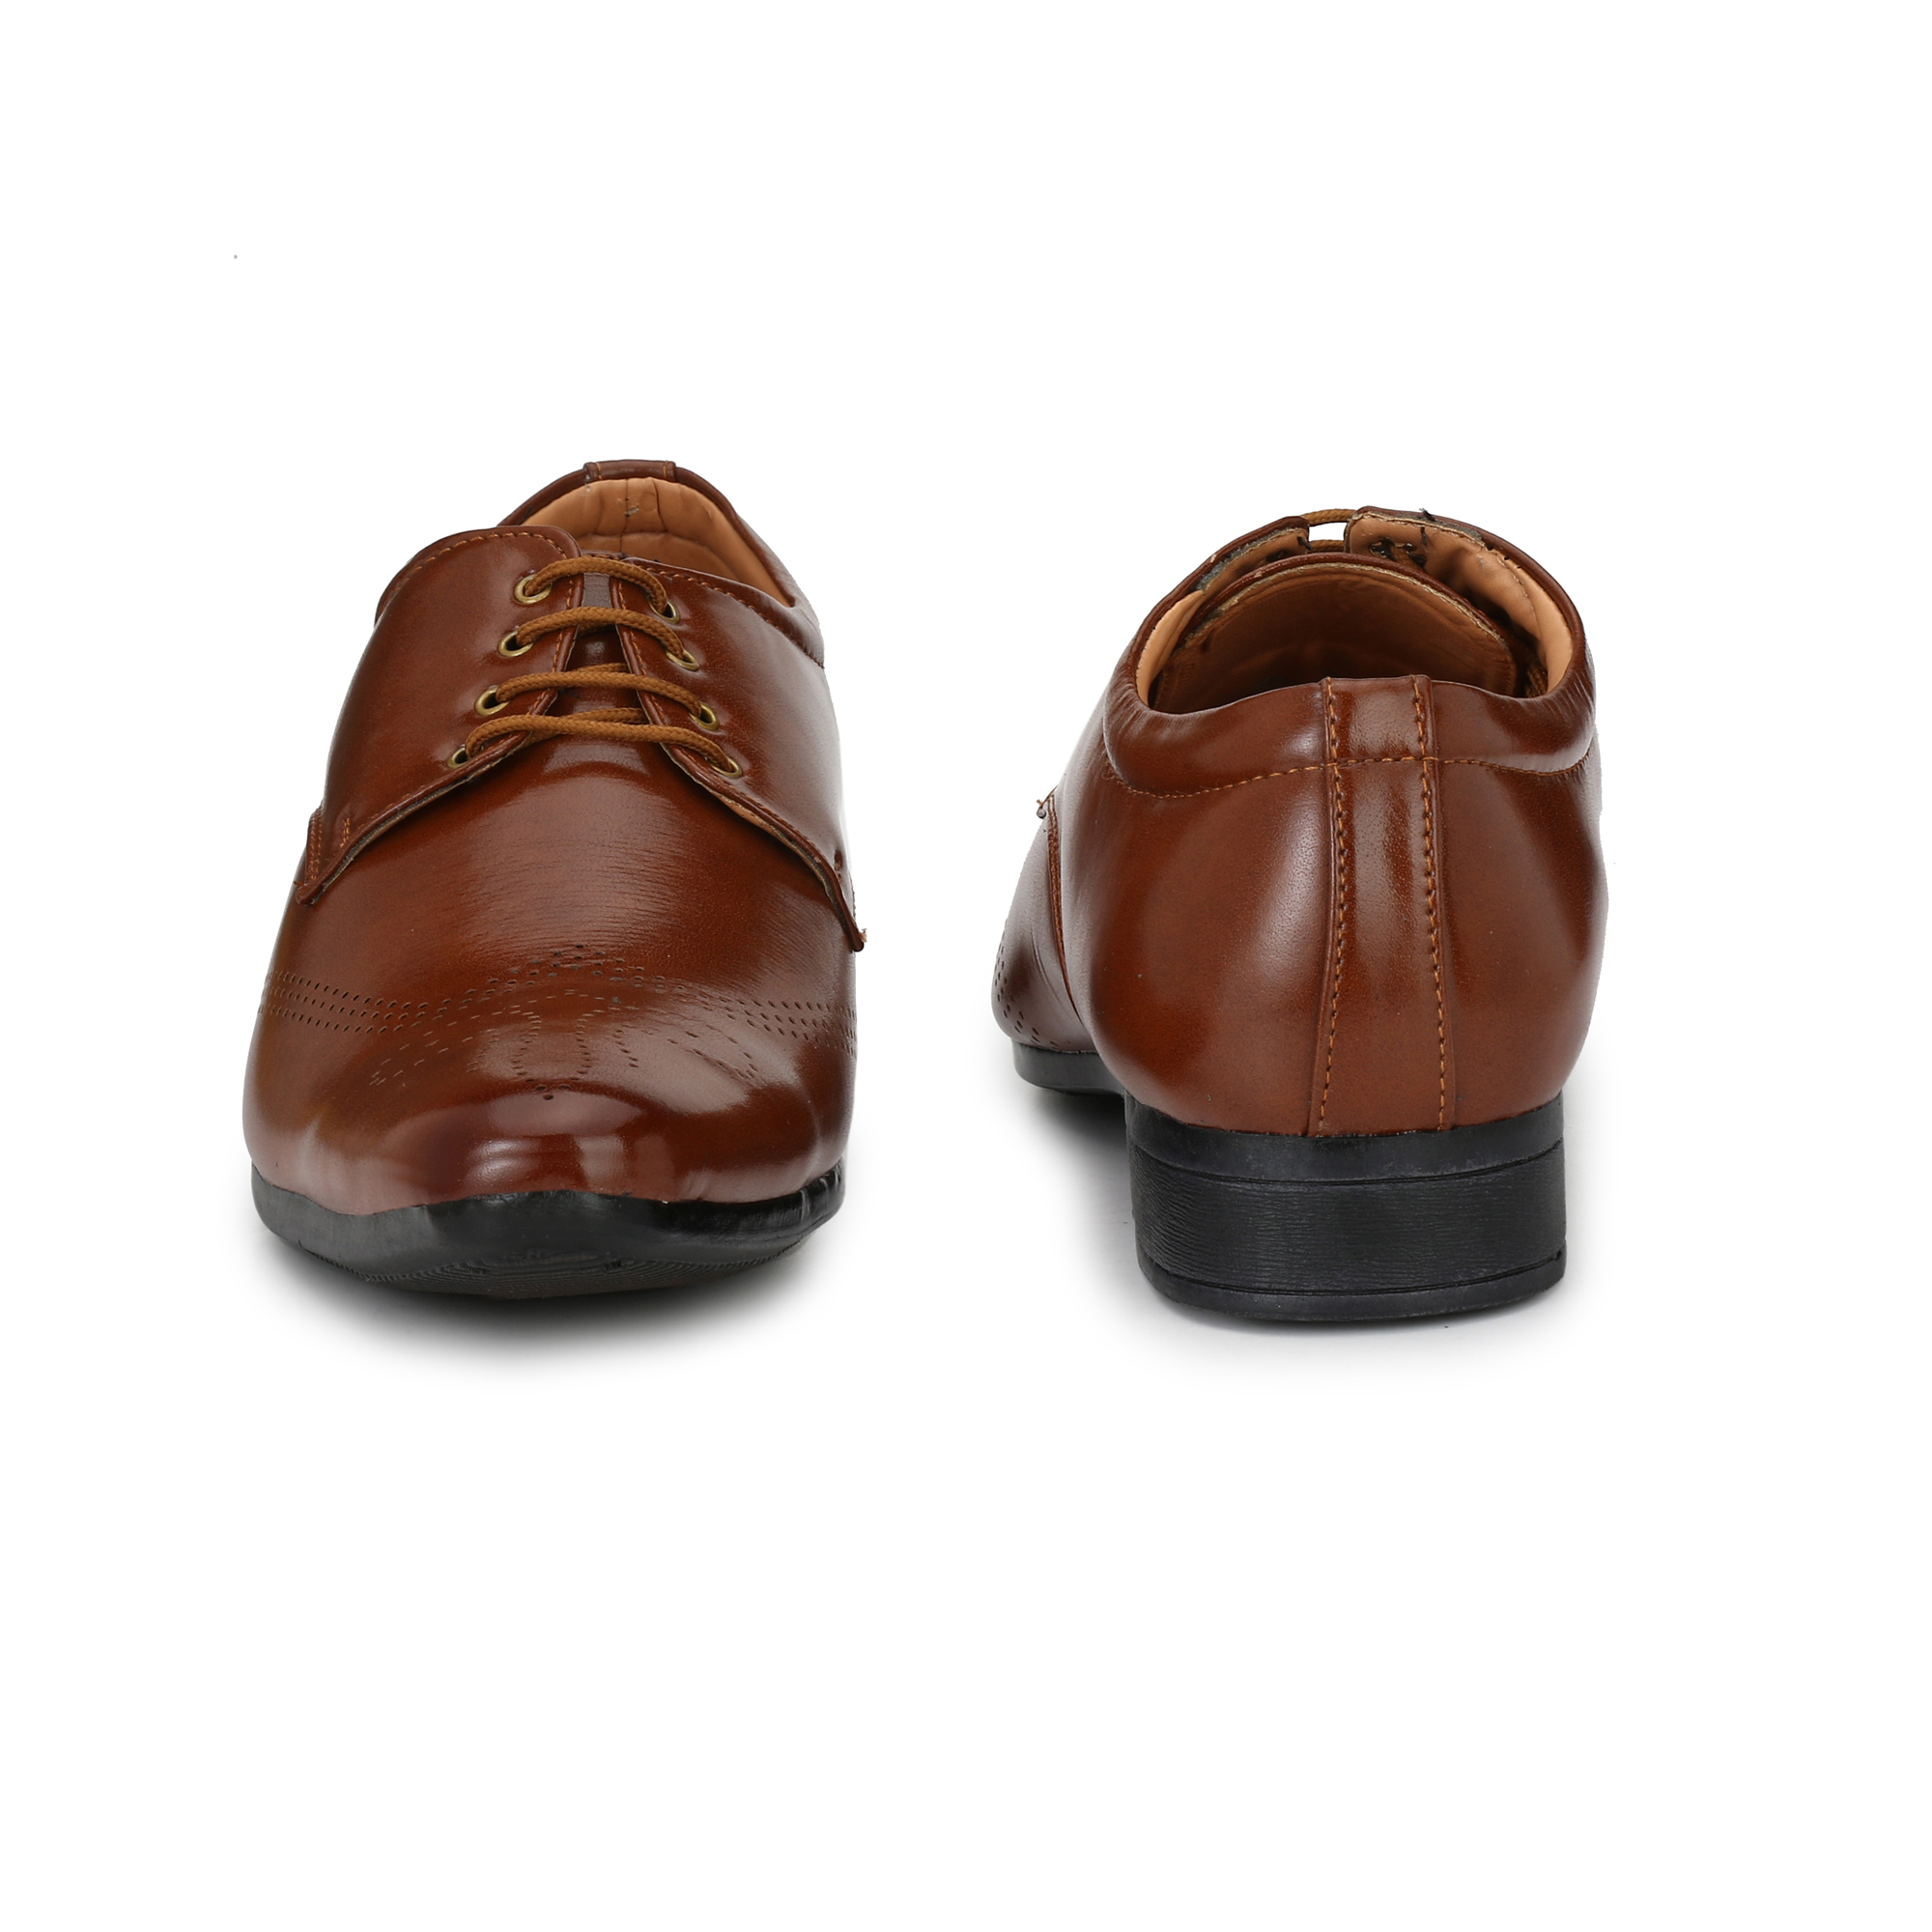 Buy Dev Shoes Men's Brown Lace-up Formal Shoes Online @ ₹499 from ShopClues